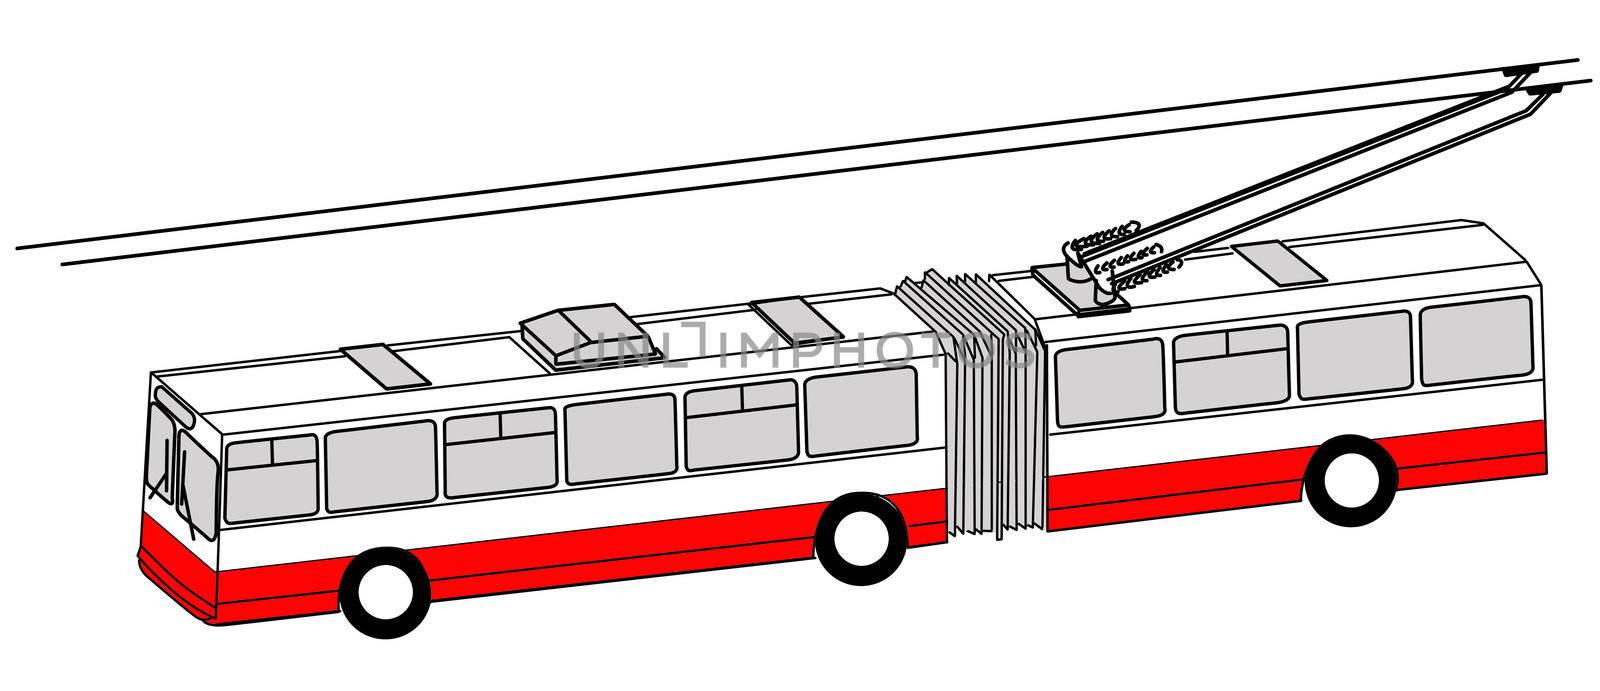 trolley bus silhouette on white background, vector illustration